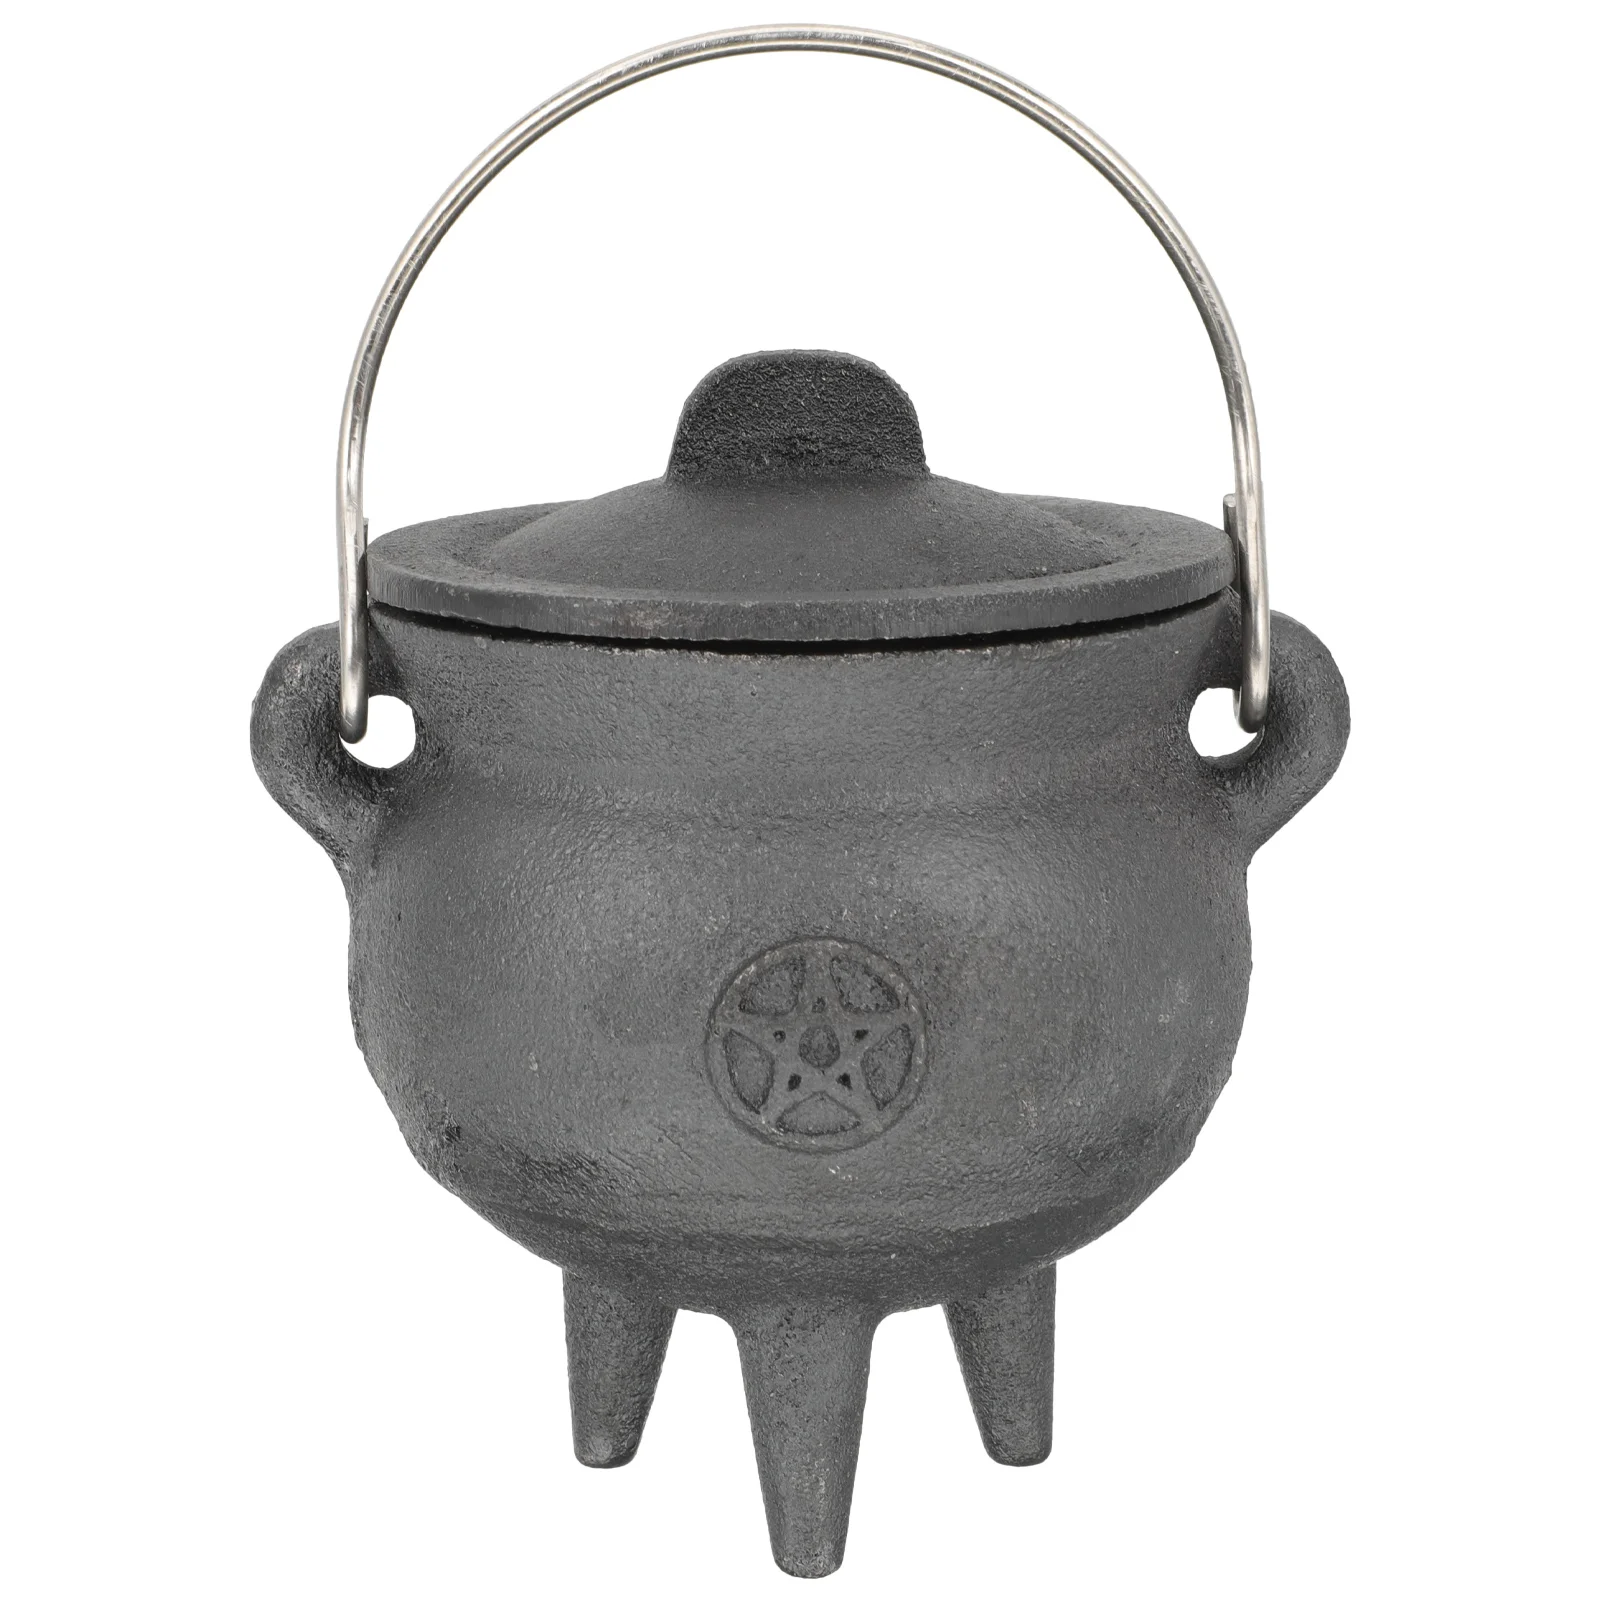 

Witch's Cauldron Small Pot Party Tricky Halloween Decorations Religion Ornament Vintage Candy Adornment Iron Handicraft